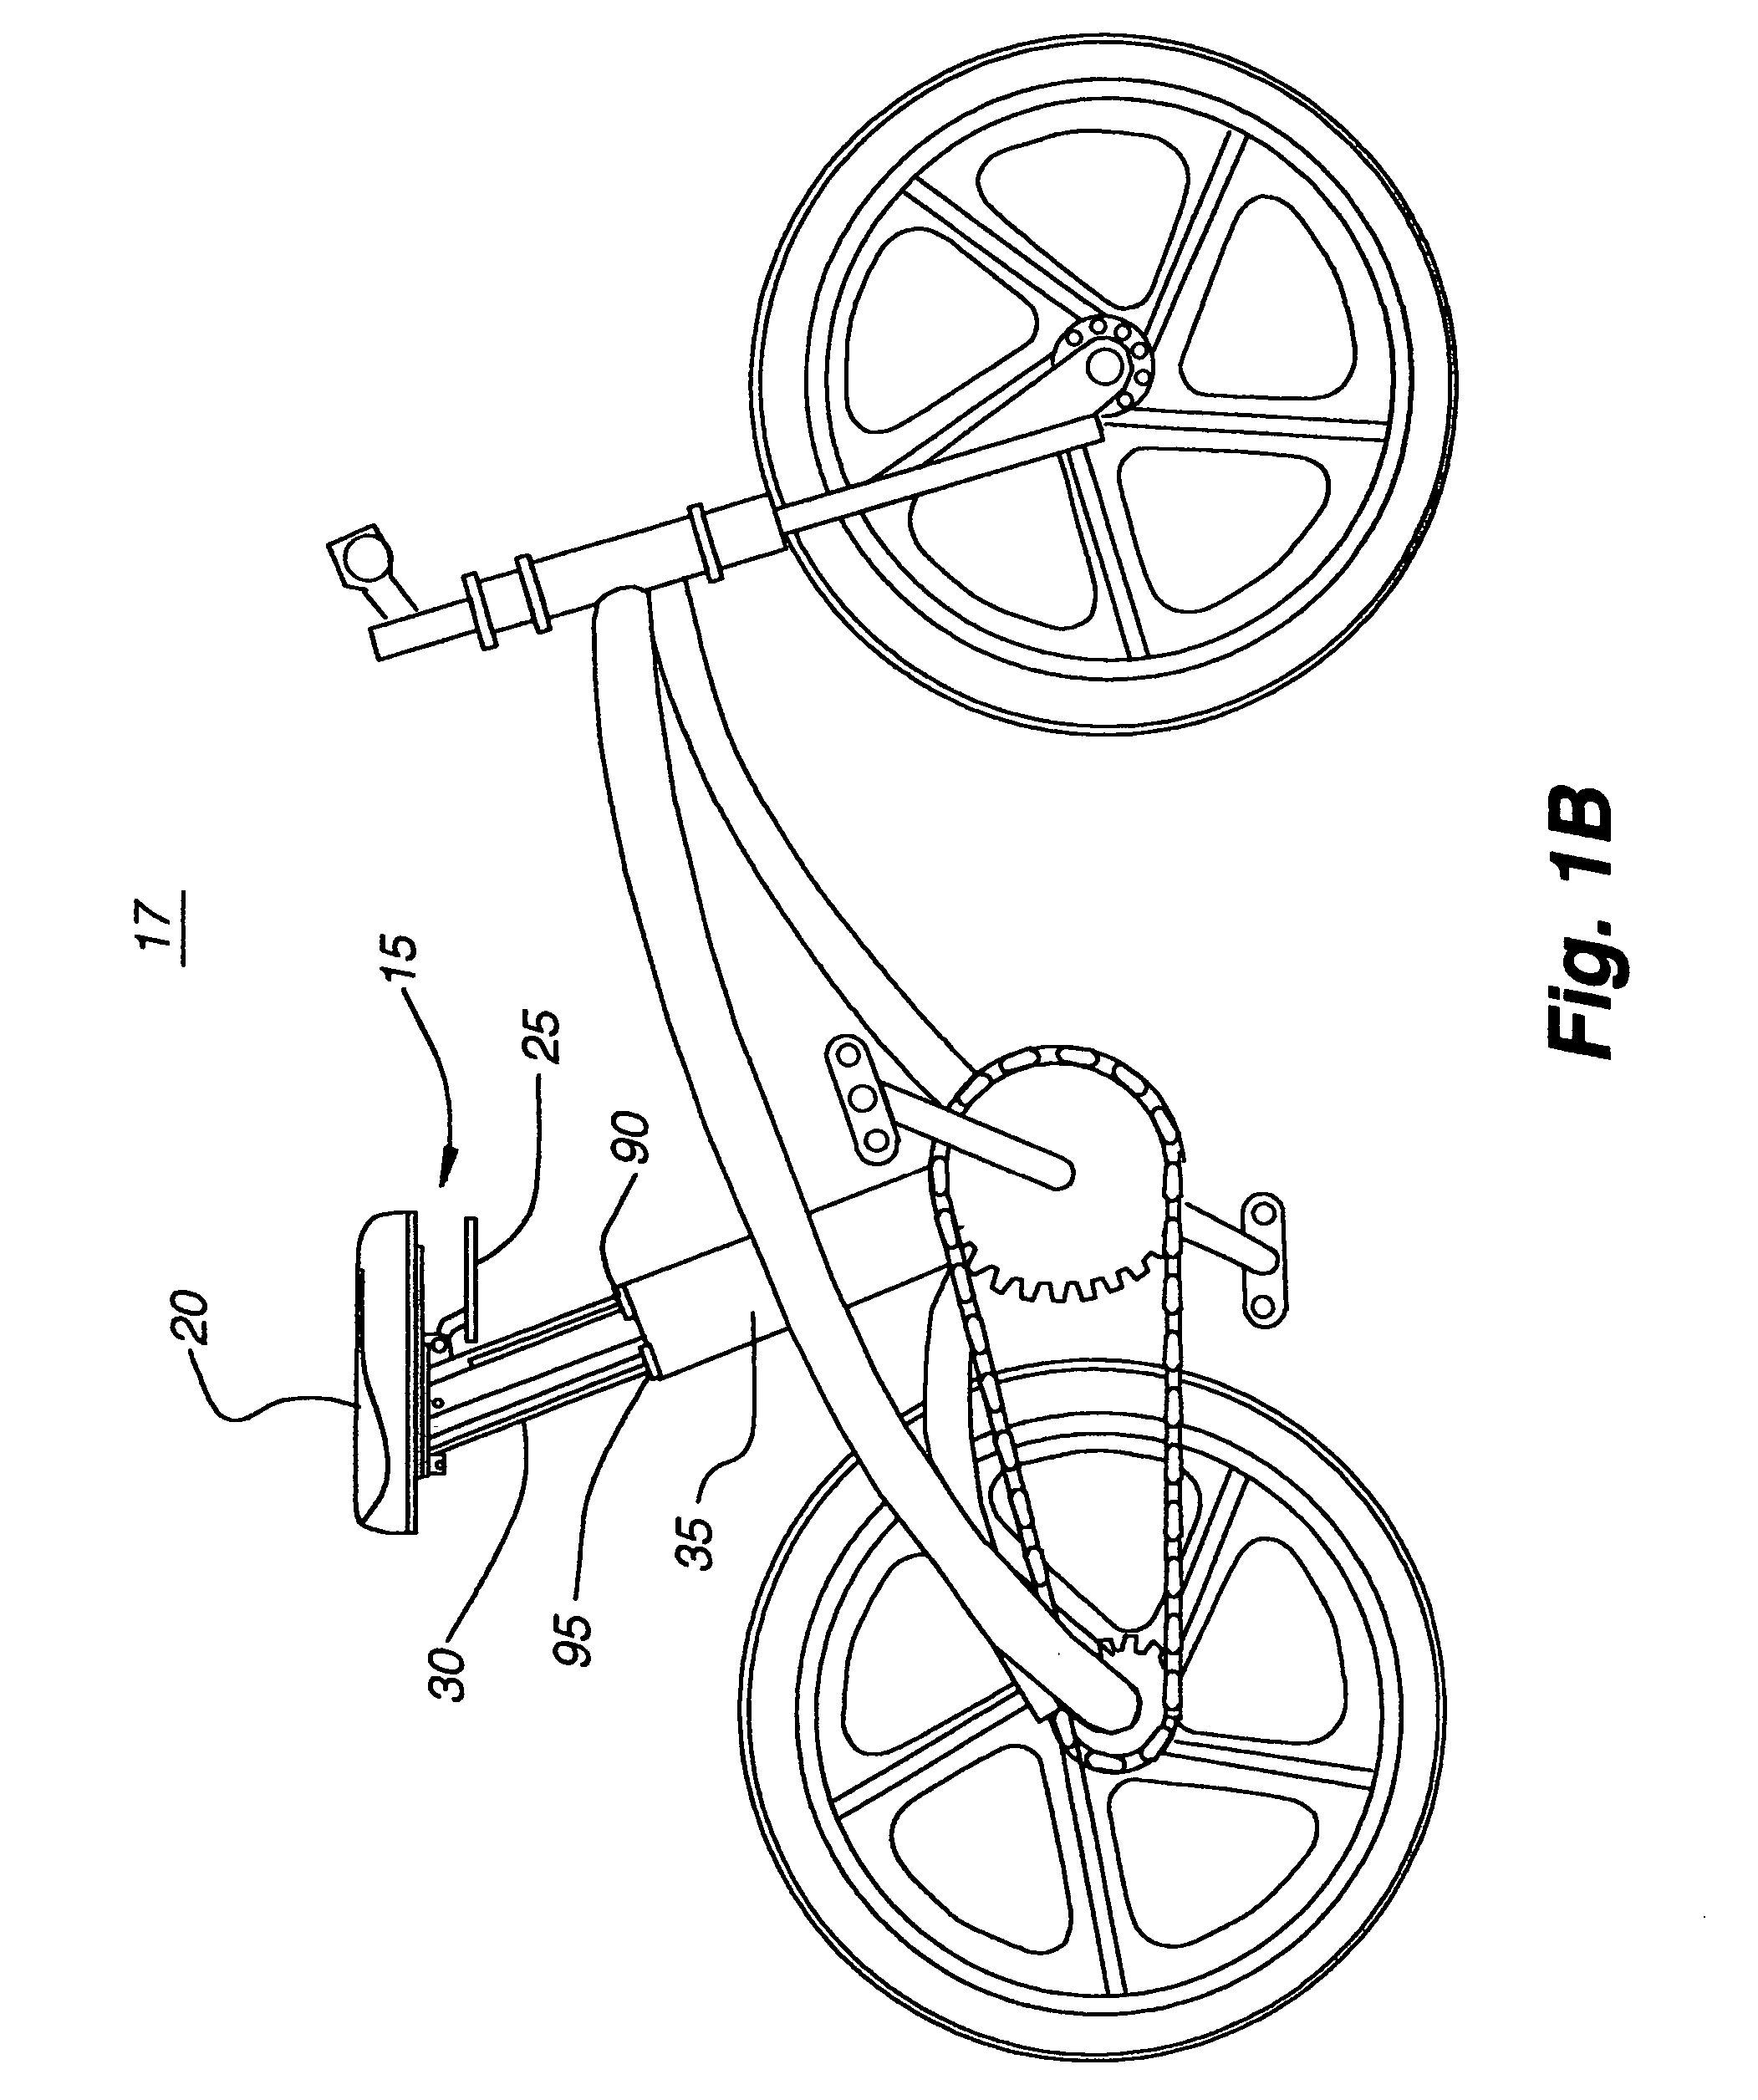 Mechanism and method for adjusting seat height for exercise equipment